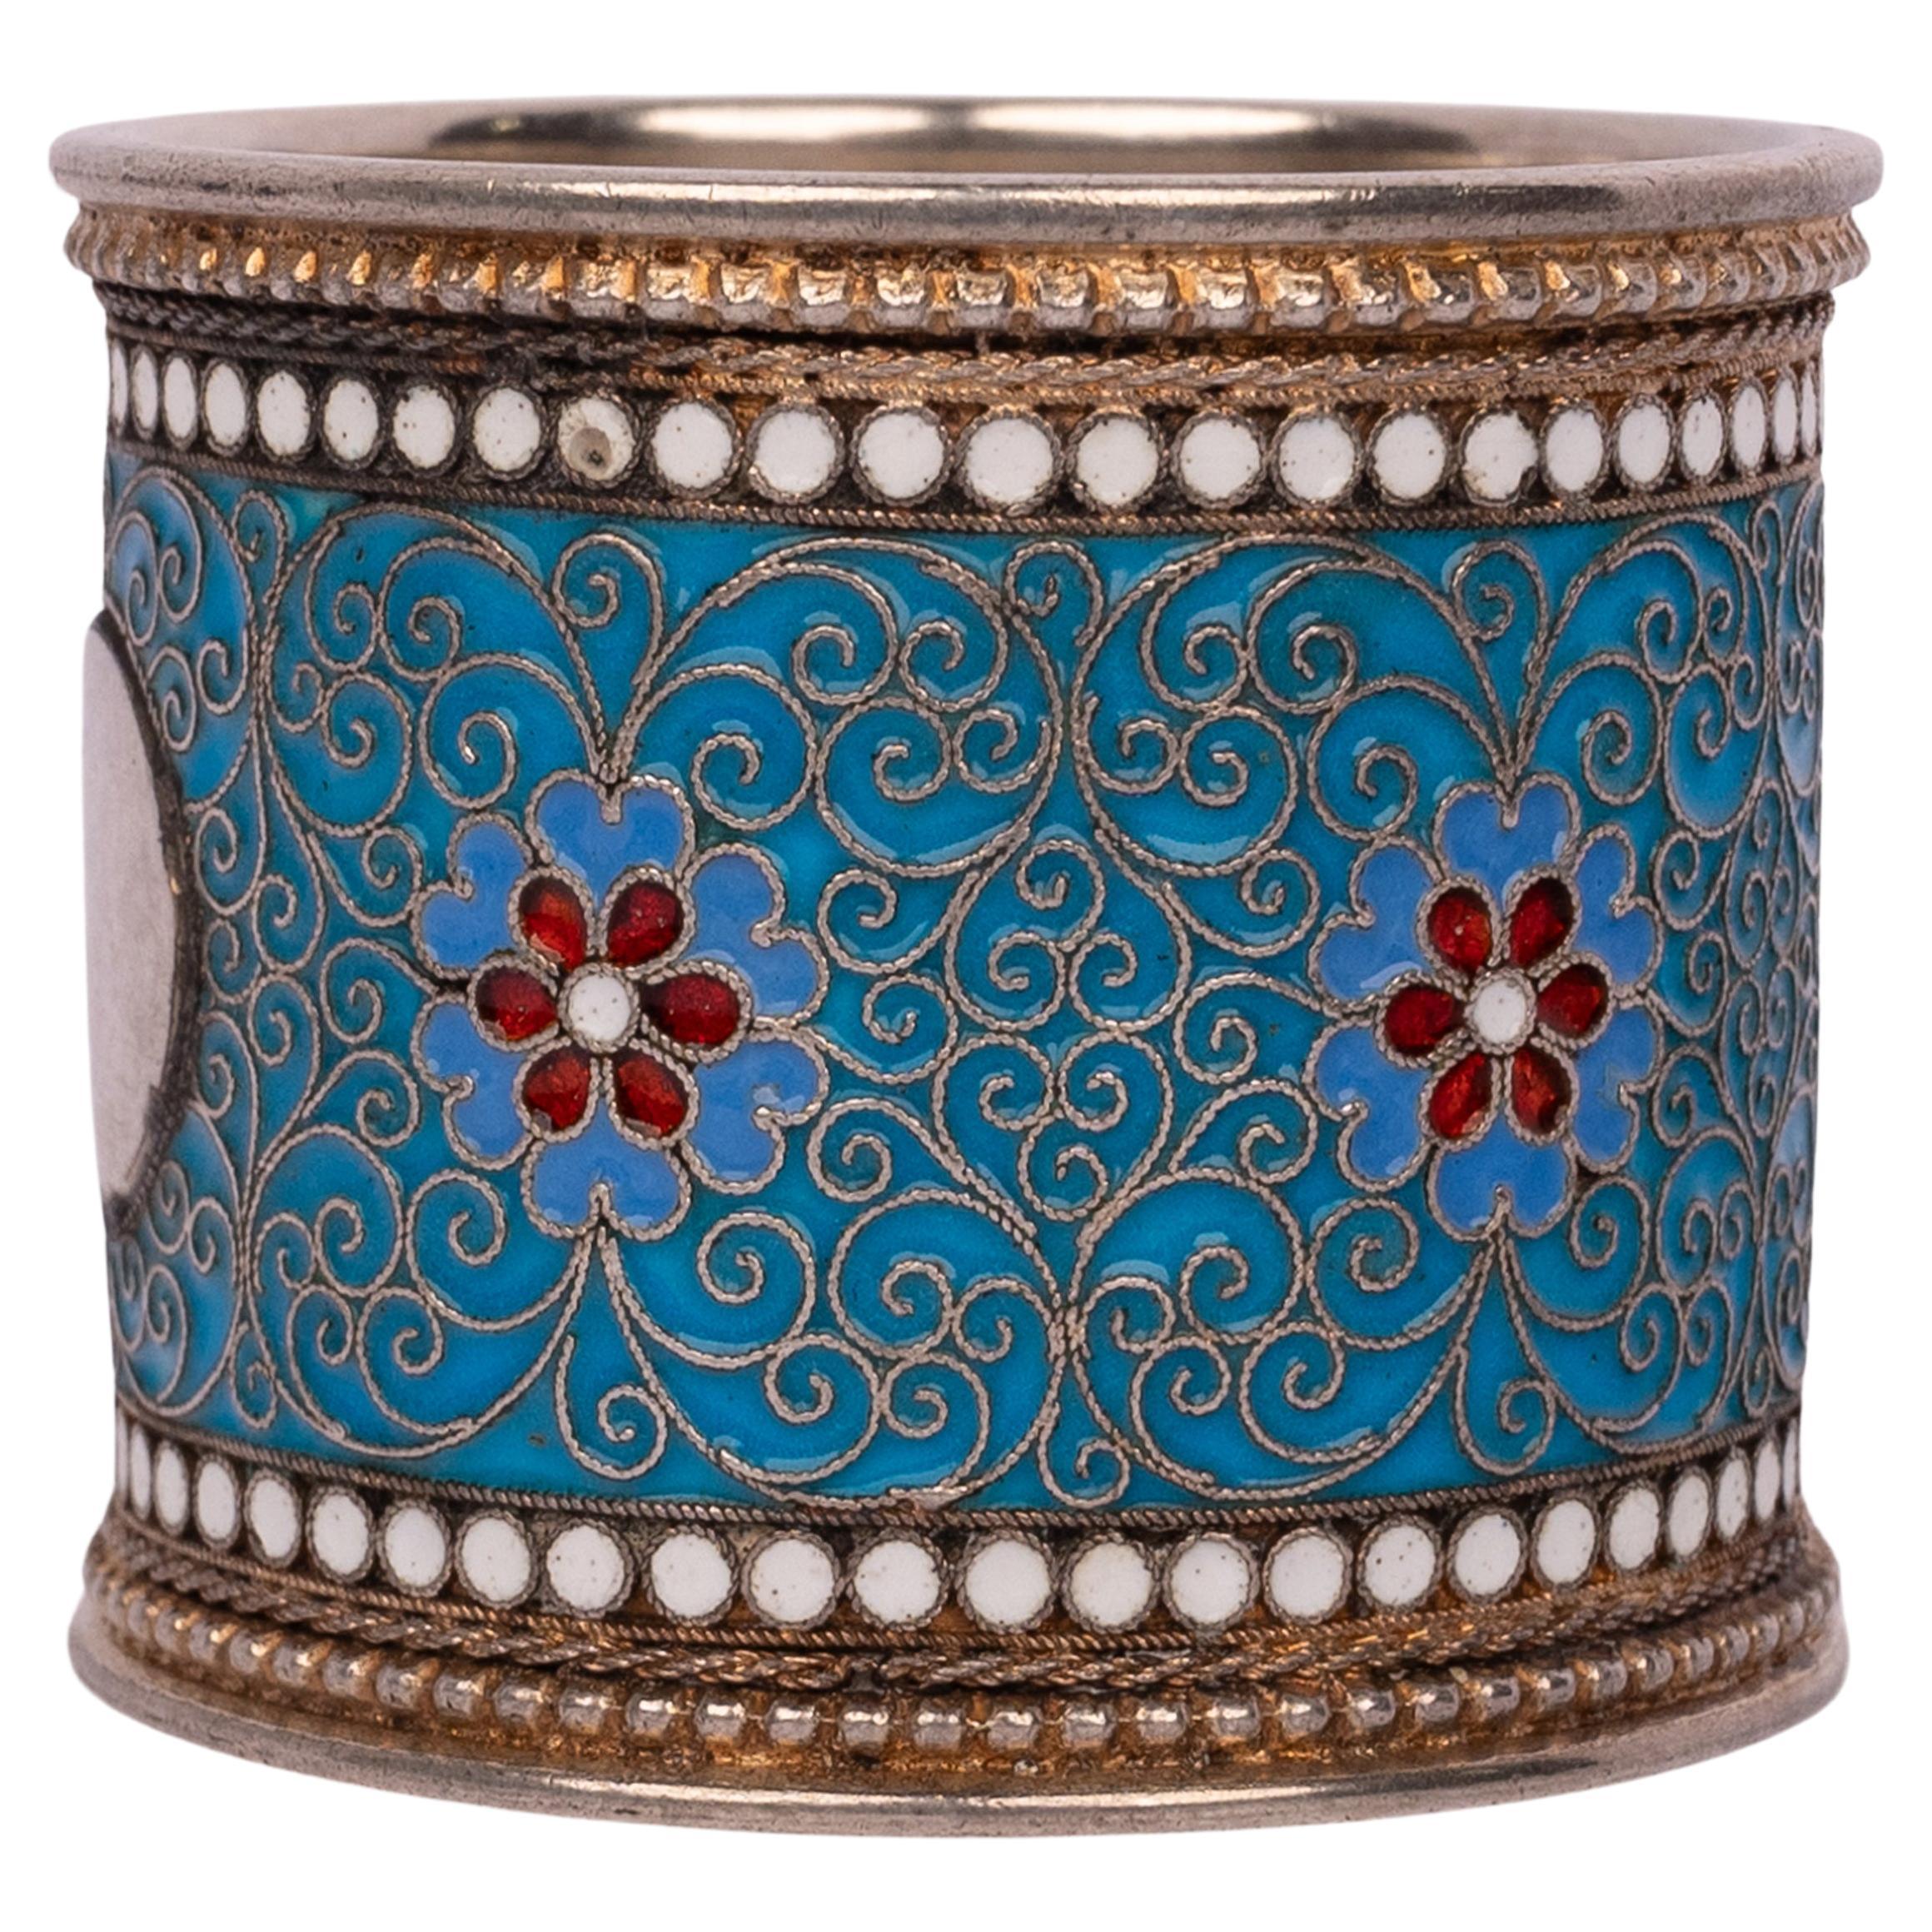 Antique Russian Imperial silver gilt cloisonne enamel napkin ring holder, silversmith; M.F. Sokolov, Moscow, 1896.
A very elegant Russian napkin holder, the top and base having a band of circular white enamel decoration, the body of the ring having